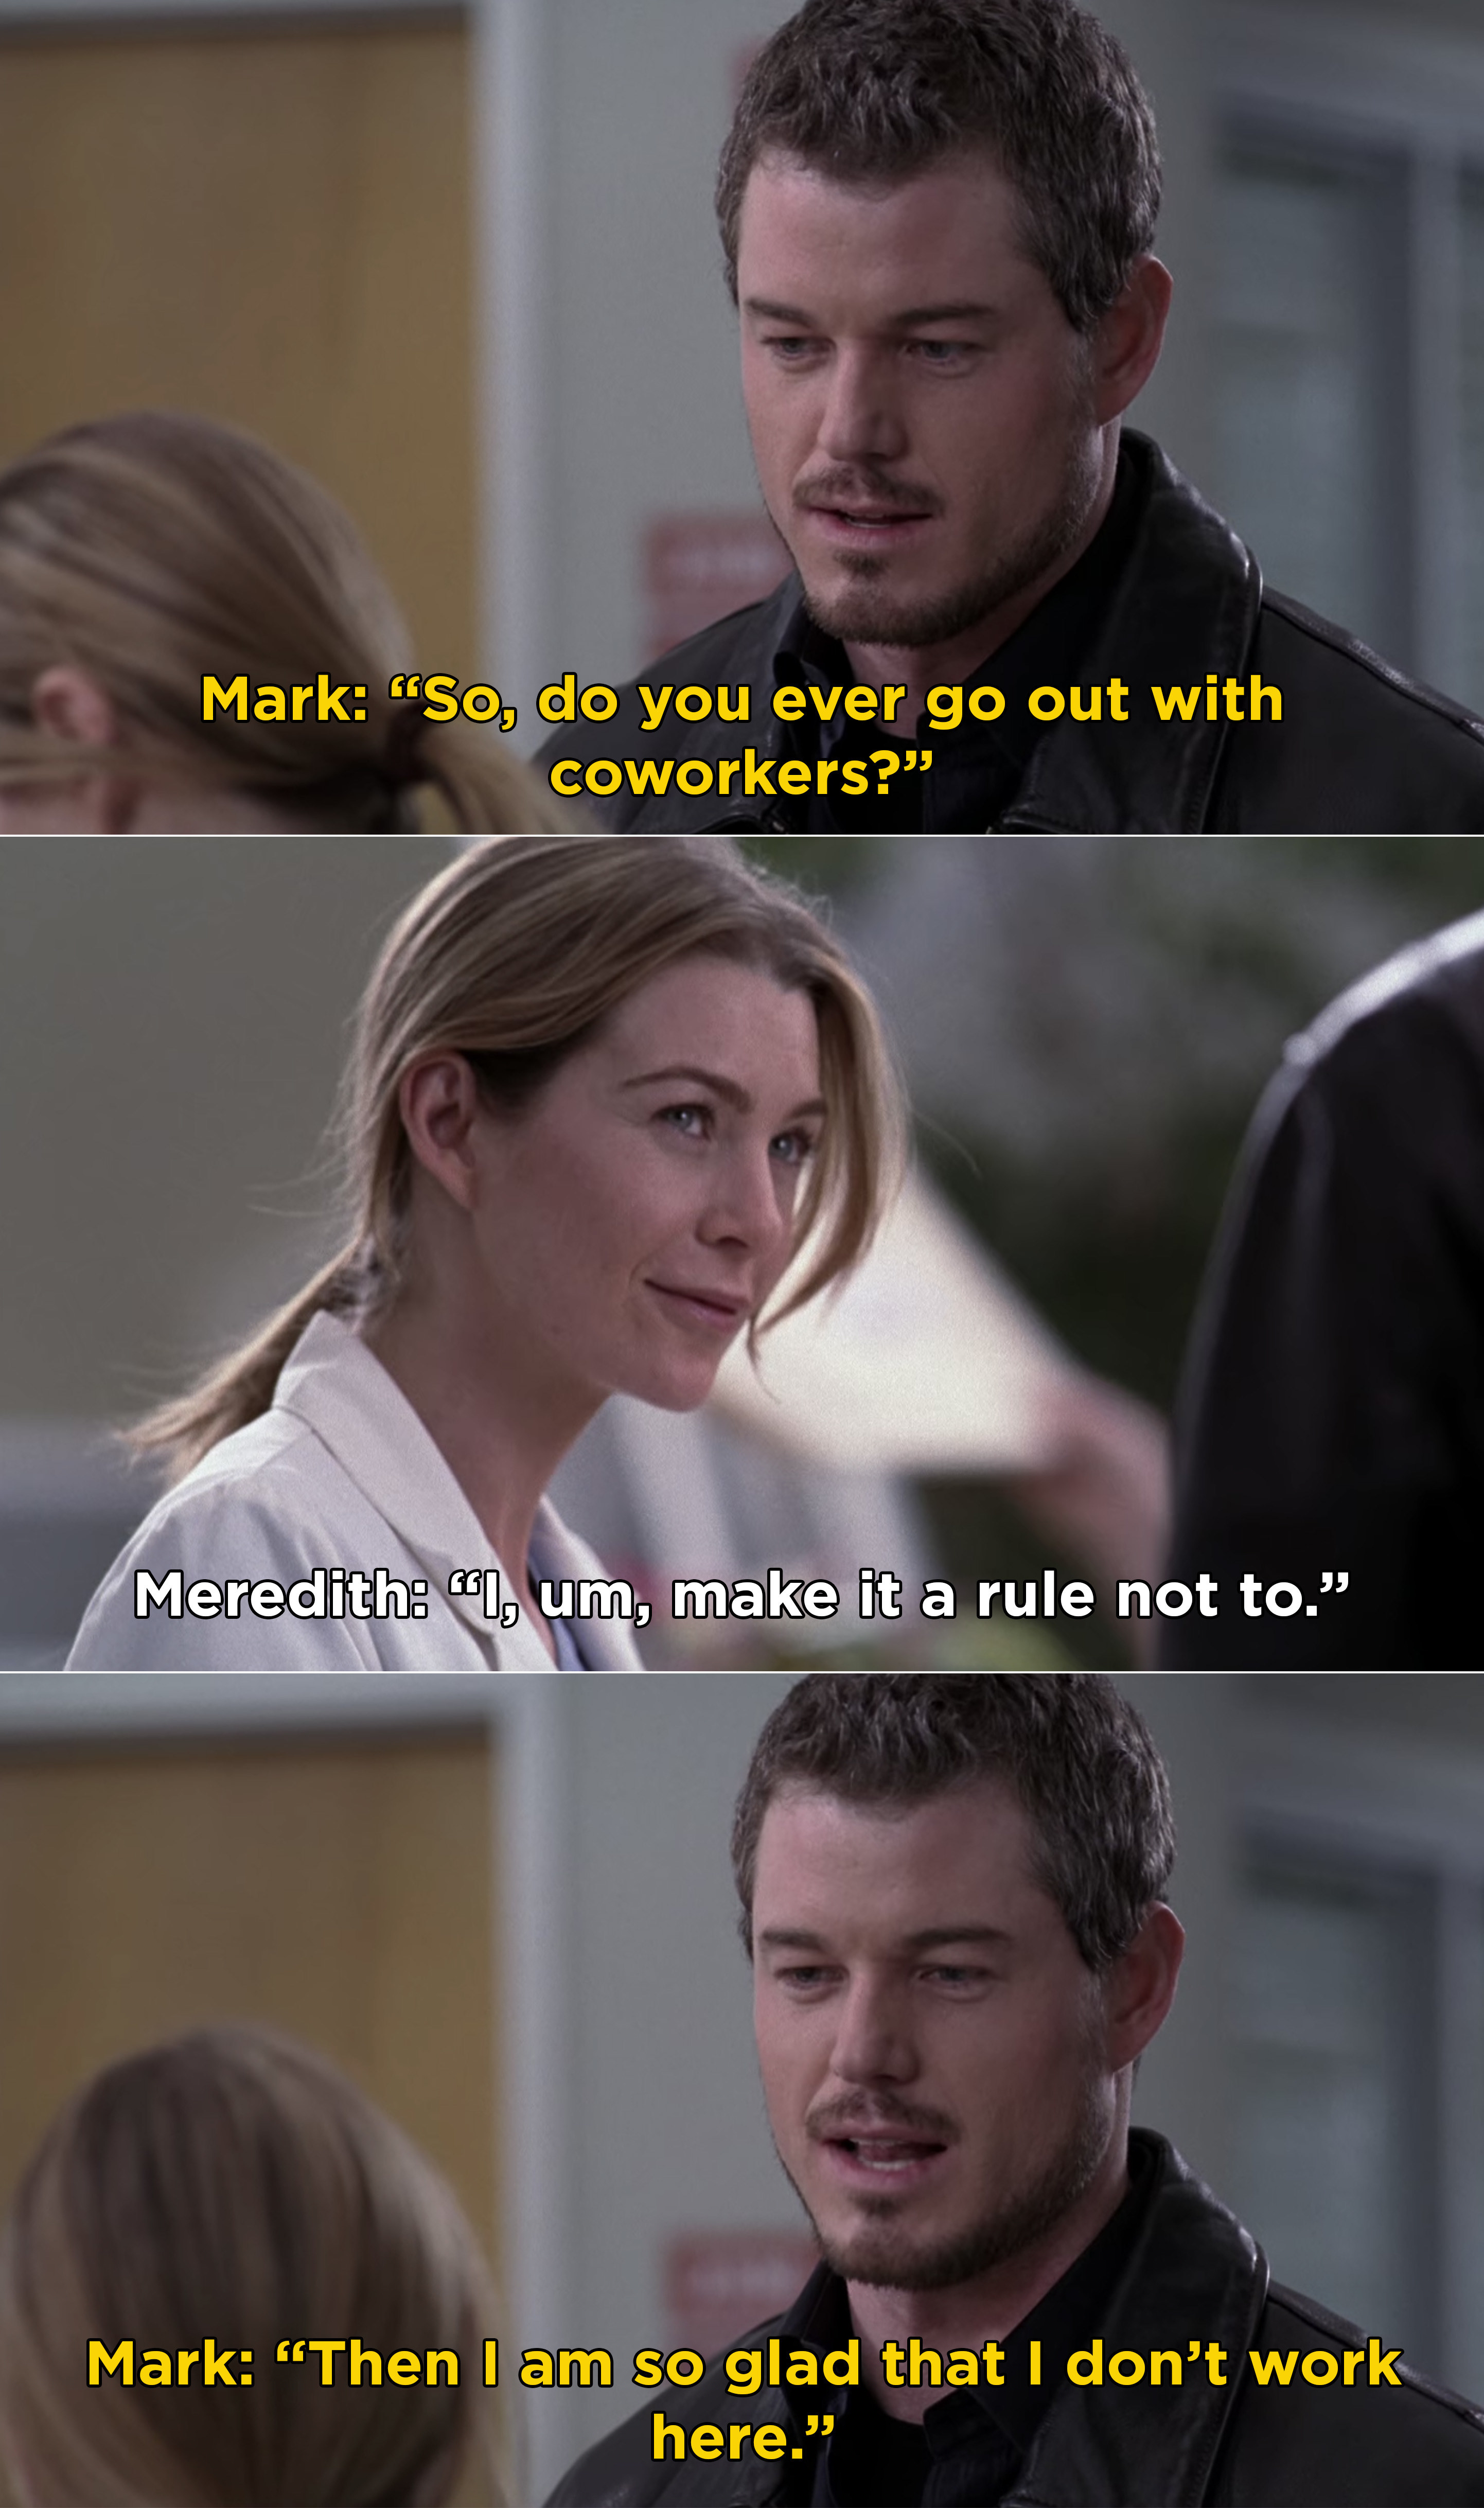 Mark meeting Meredith and hitting on her